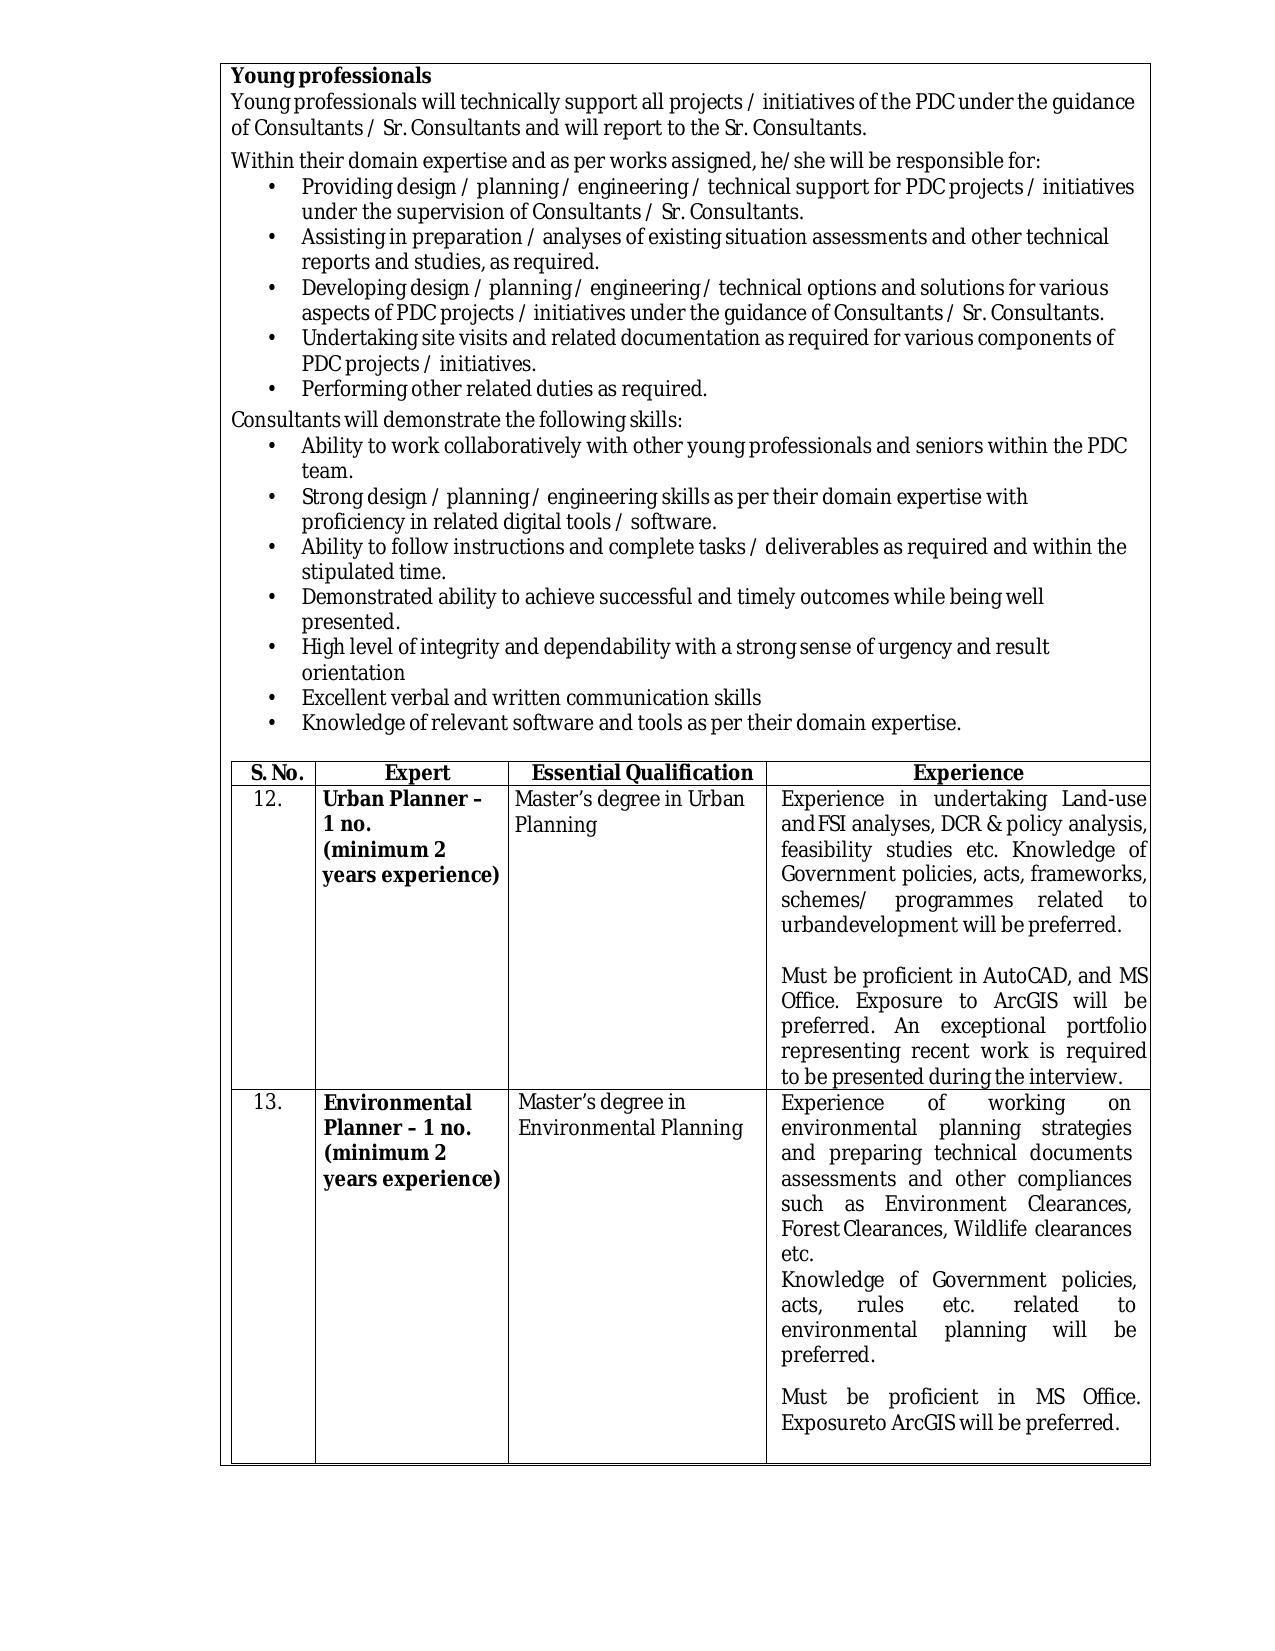 ANIIDCO Invites Application for 18 Environmental Planner, More Vacancies Recruitment 2022 - Page 6